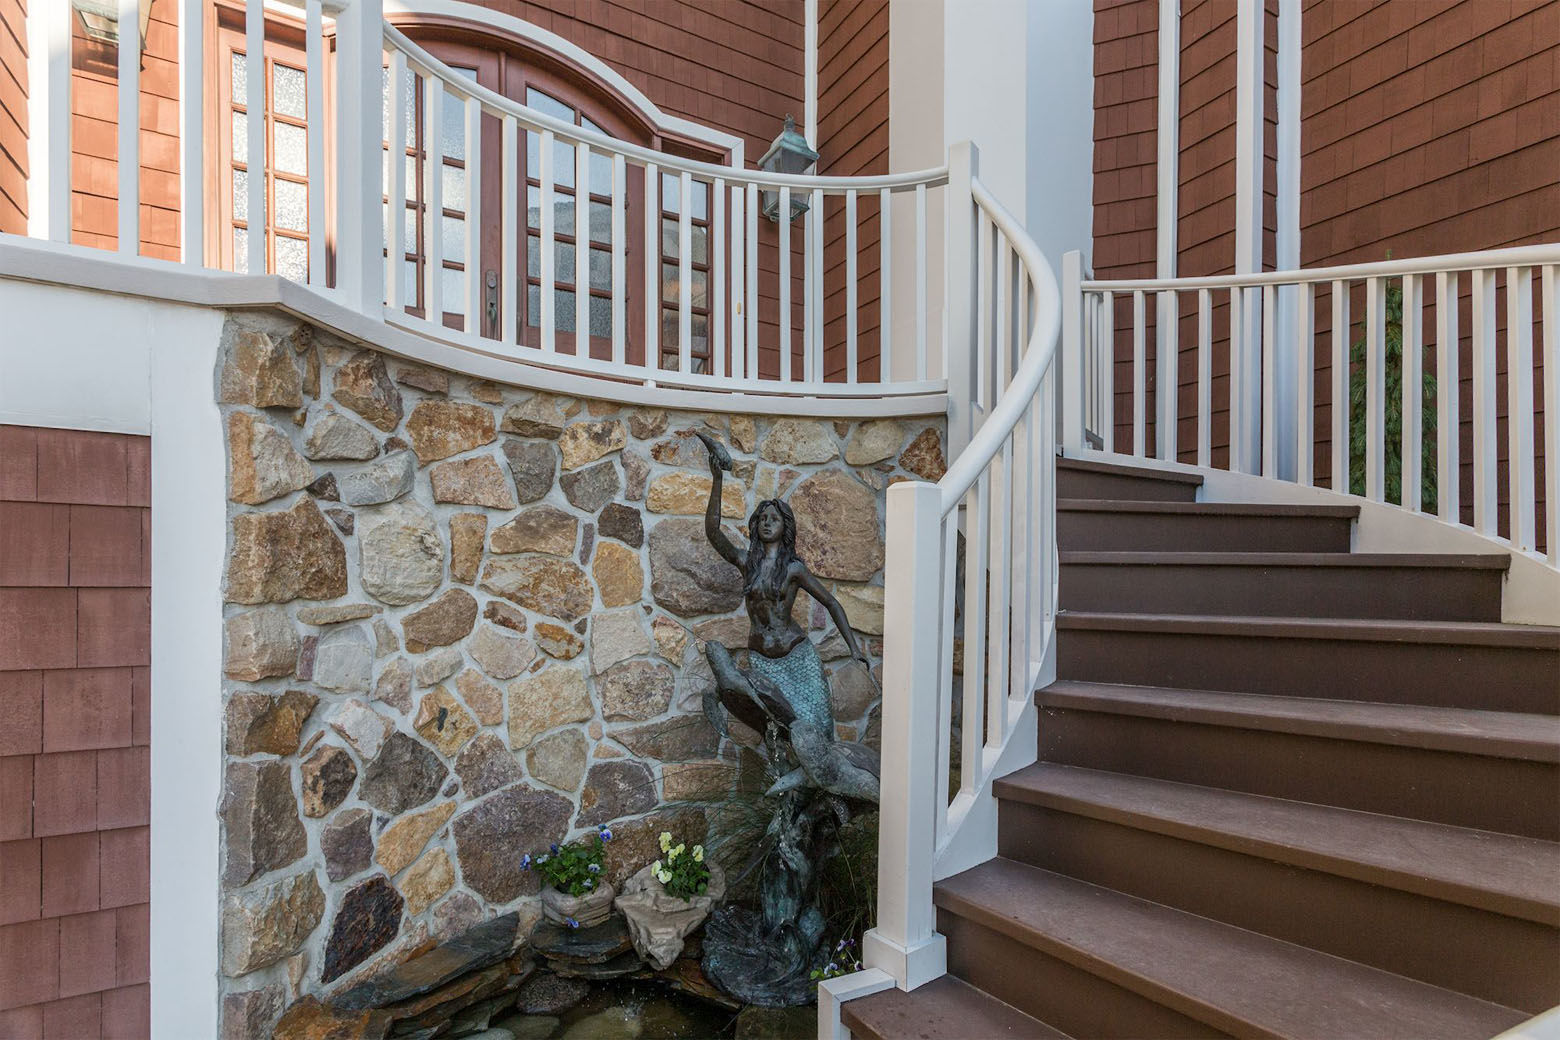 The curved staircase to the home's front entrance. (Courtesy HomeVisit)